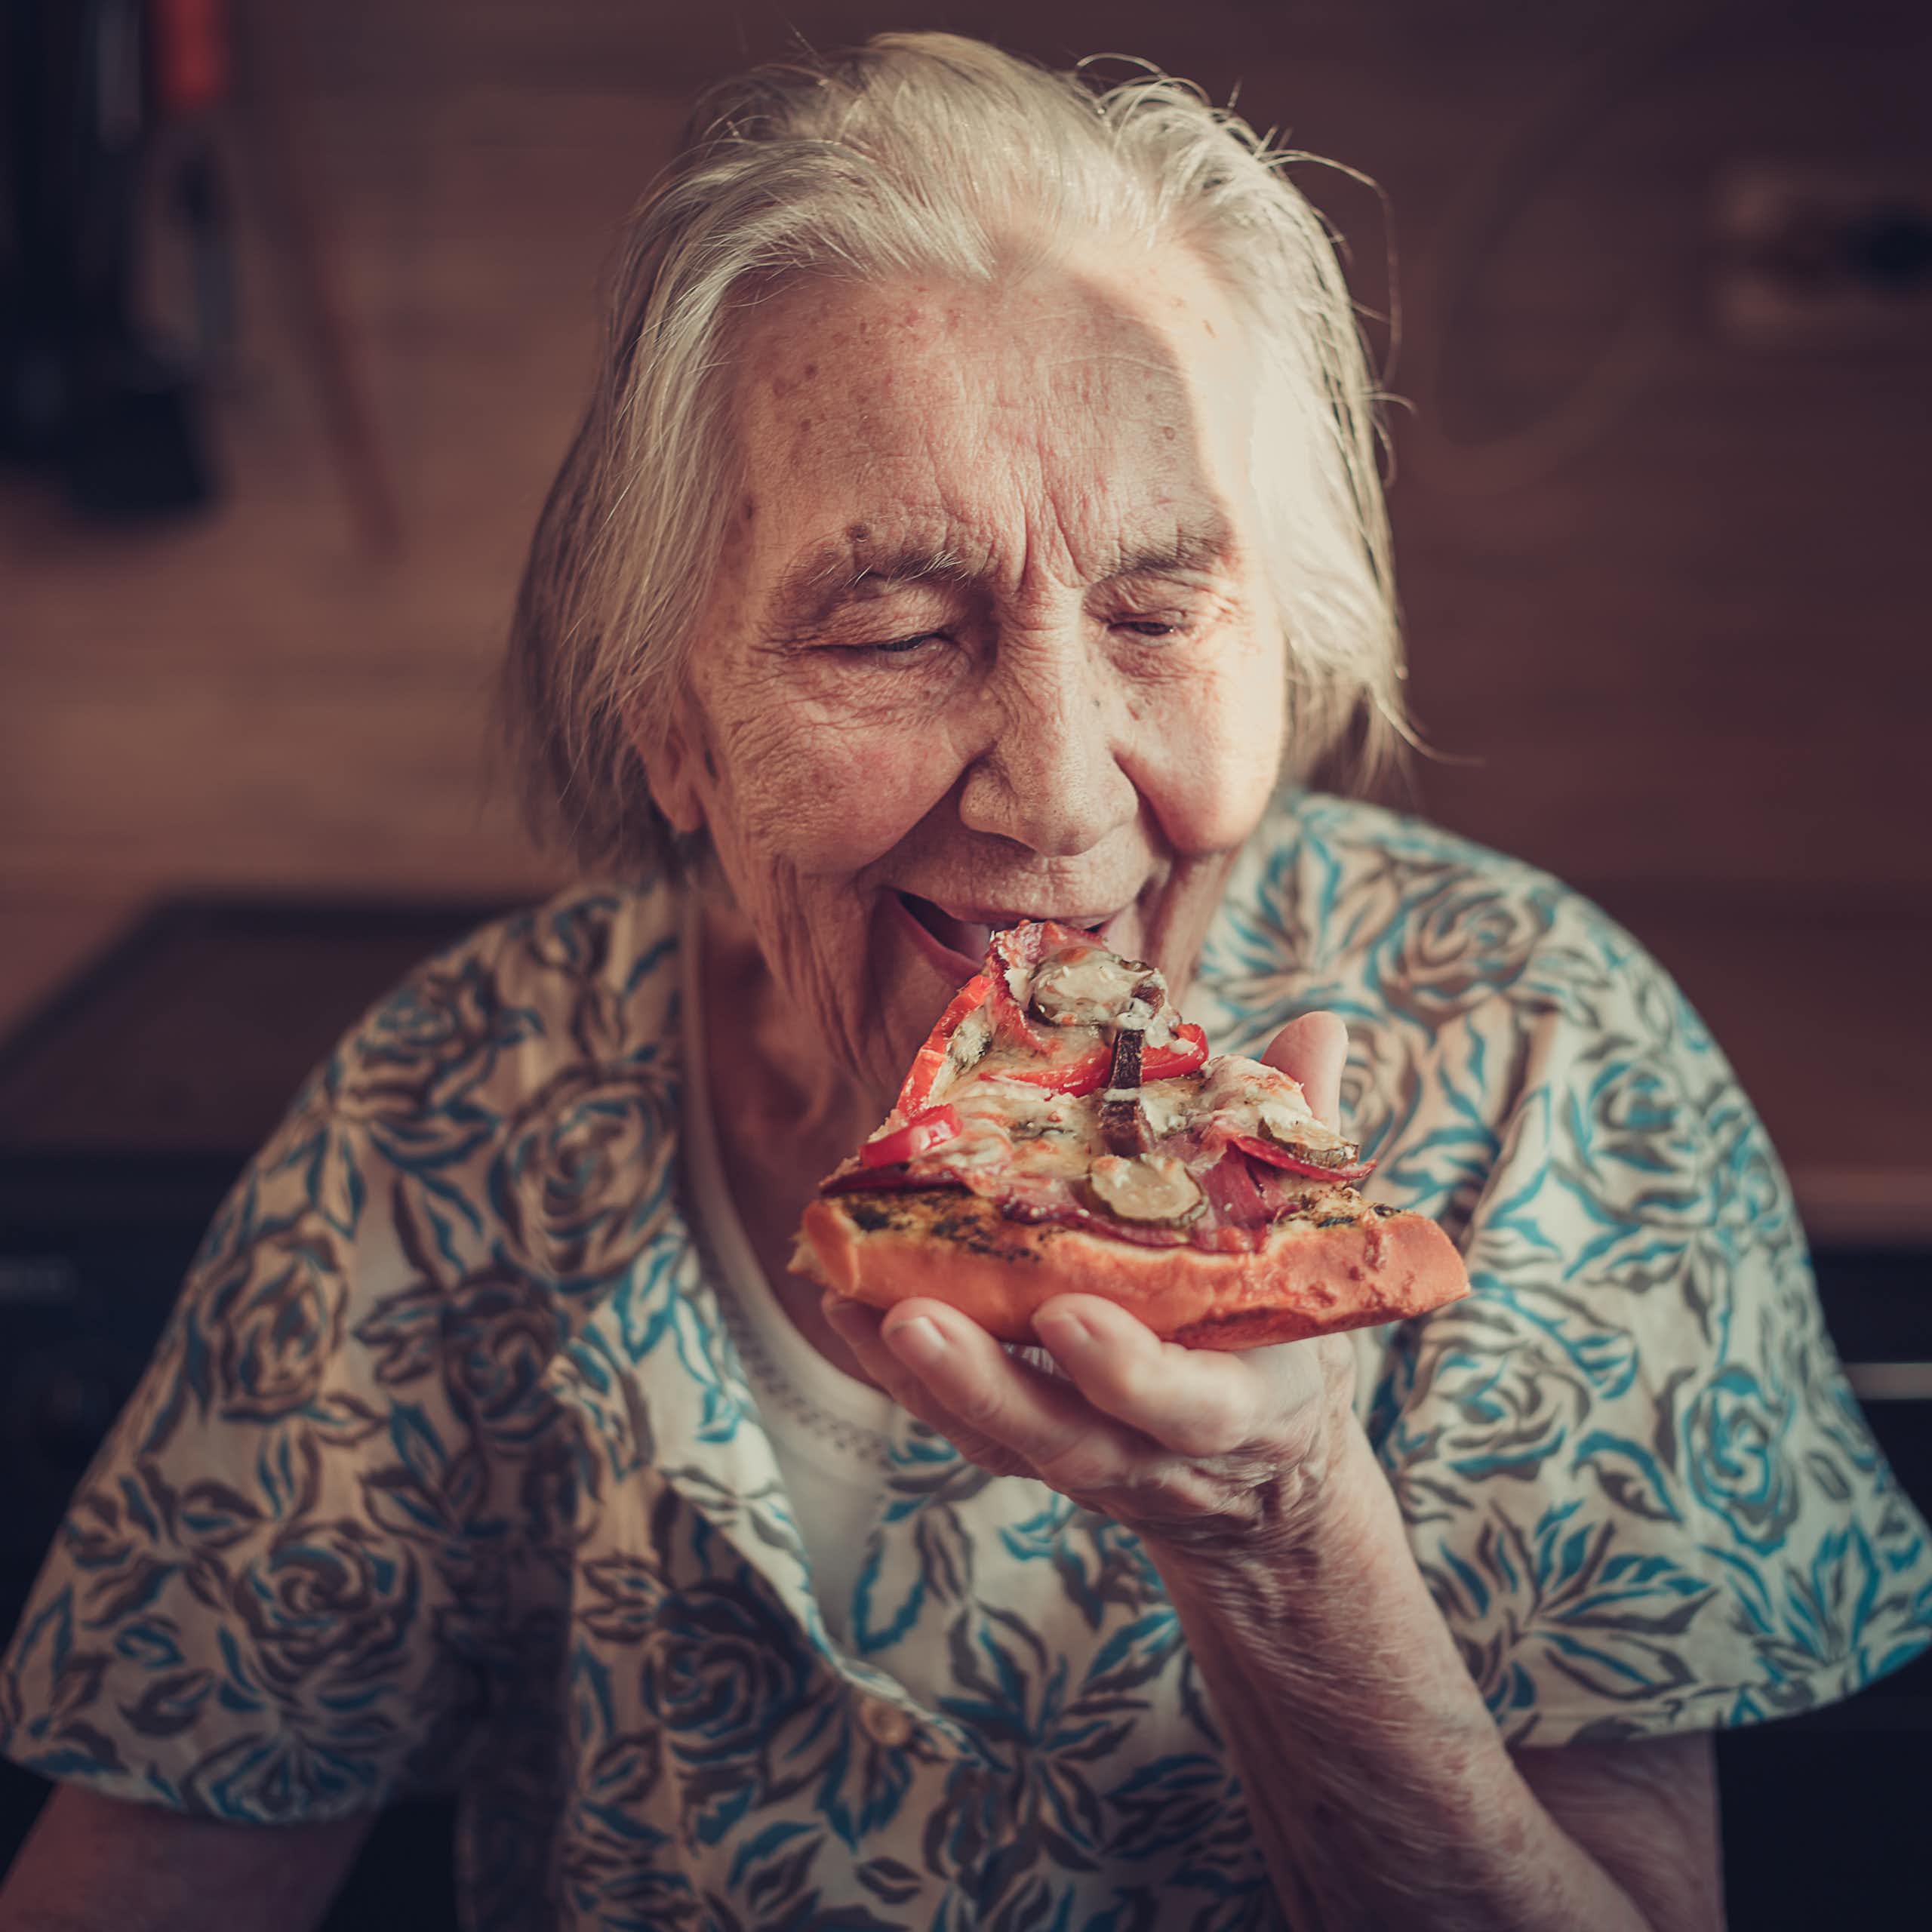 Elderly woman eating a slice of pizza